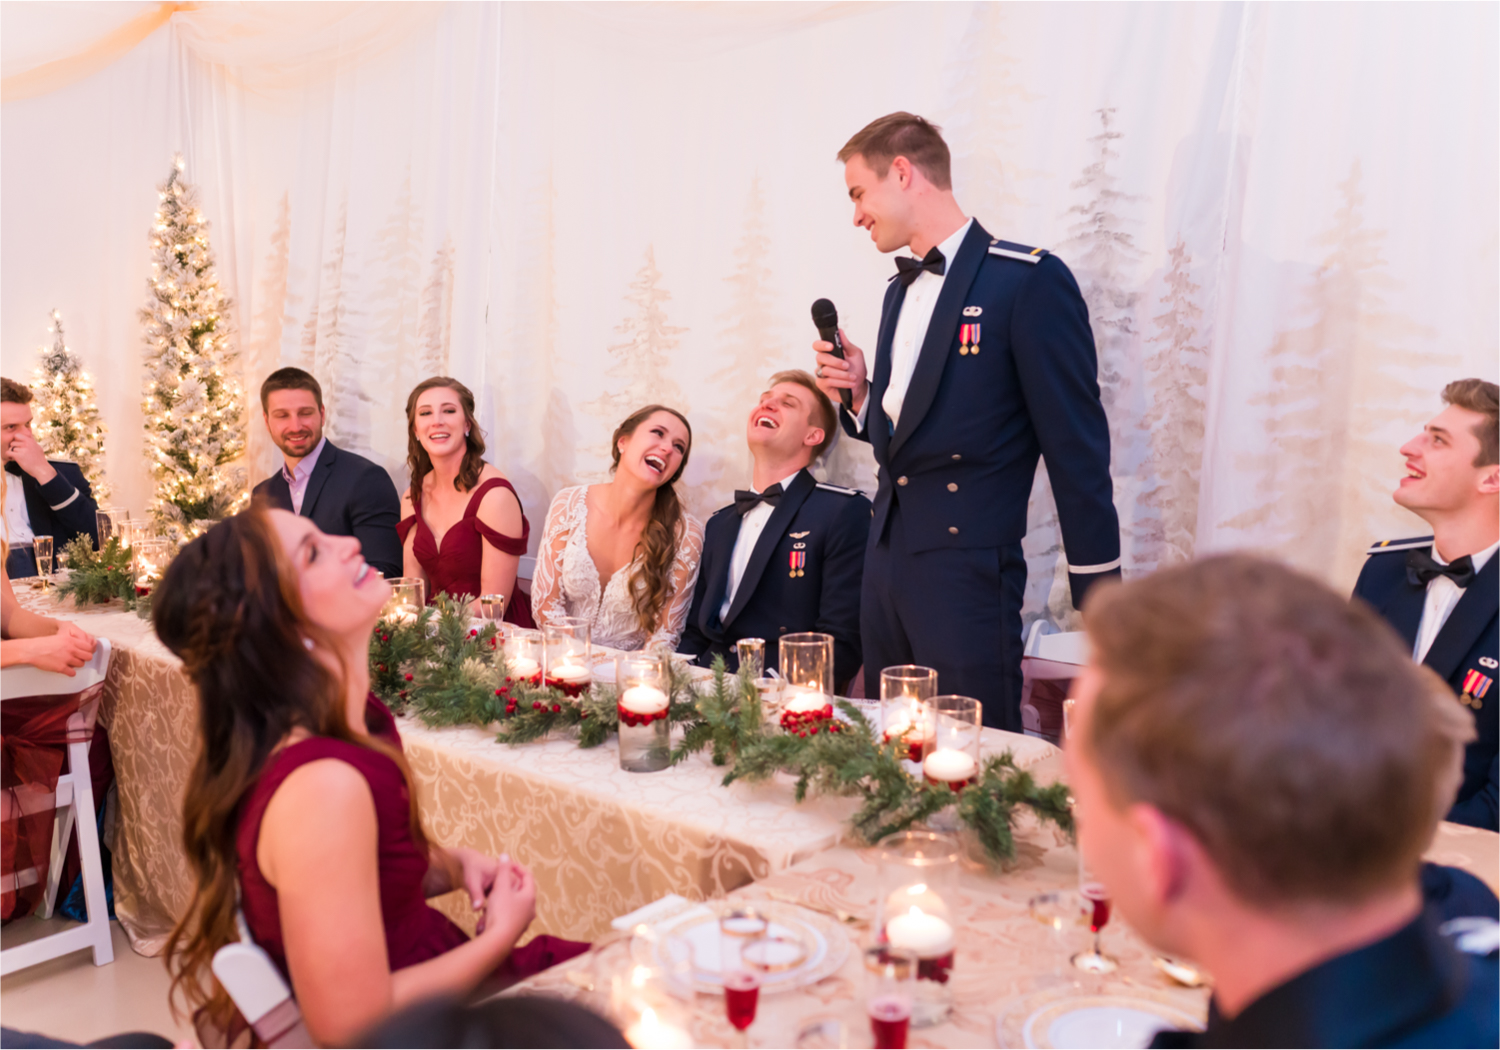 Winter Wonderland Wedding in Colorado Springs | Britni Girard Photography Colorado Wedding Photography and Film Team | Snow covered mountains and Christmas just a few days away | Annika + John's Nostalgic Winter Wedding | Bride's Dress iDream Bridal Essence of Australia | Air Force Academy | Reception with hand-painted mountain backdrops, candelight and Christmas trees.  Burgundy, Navy and Gold